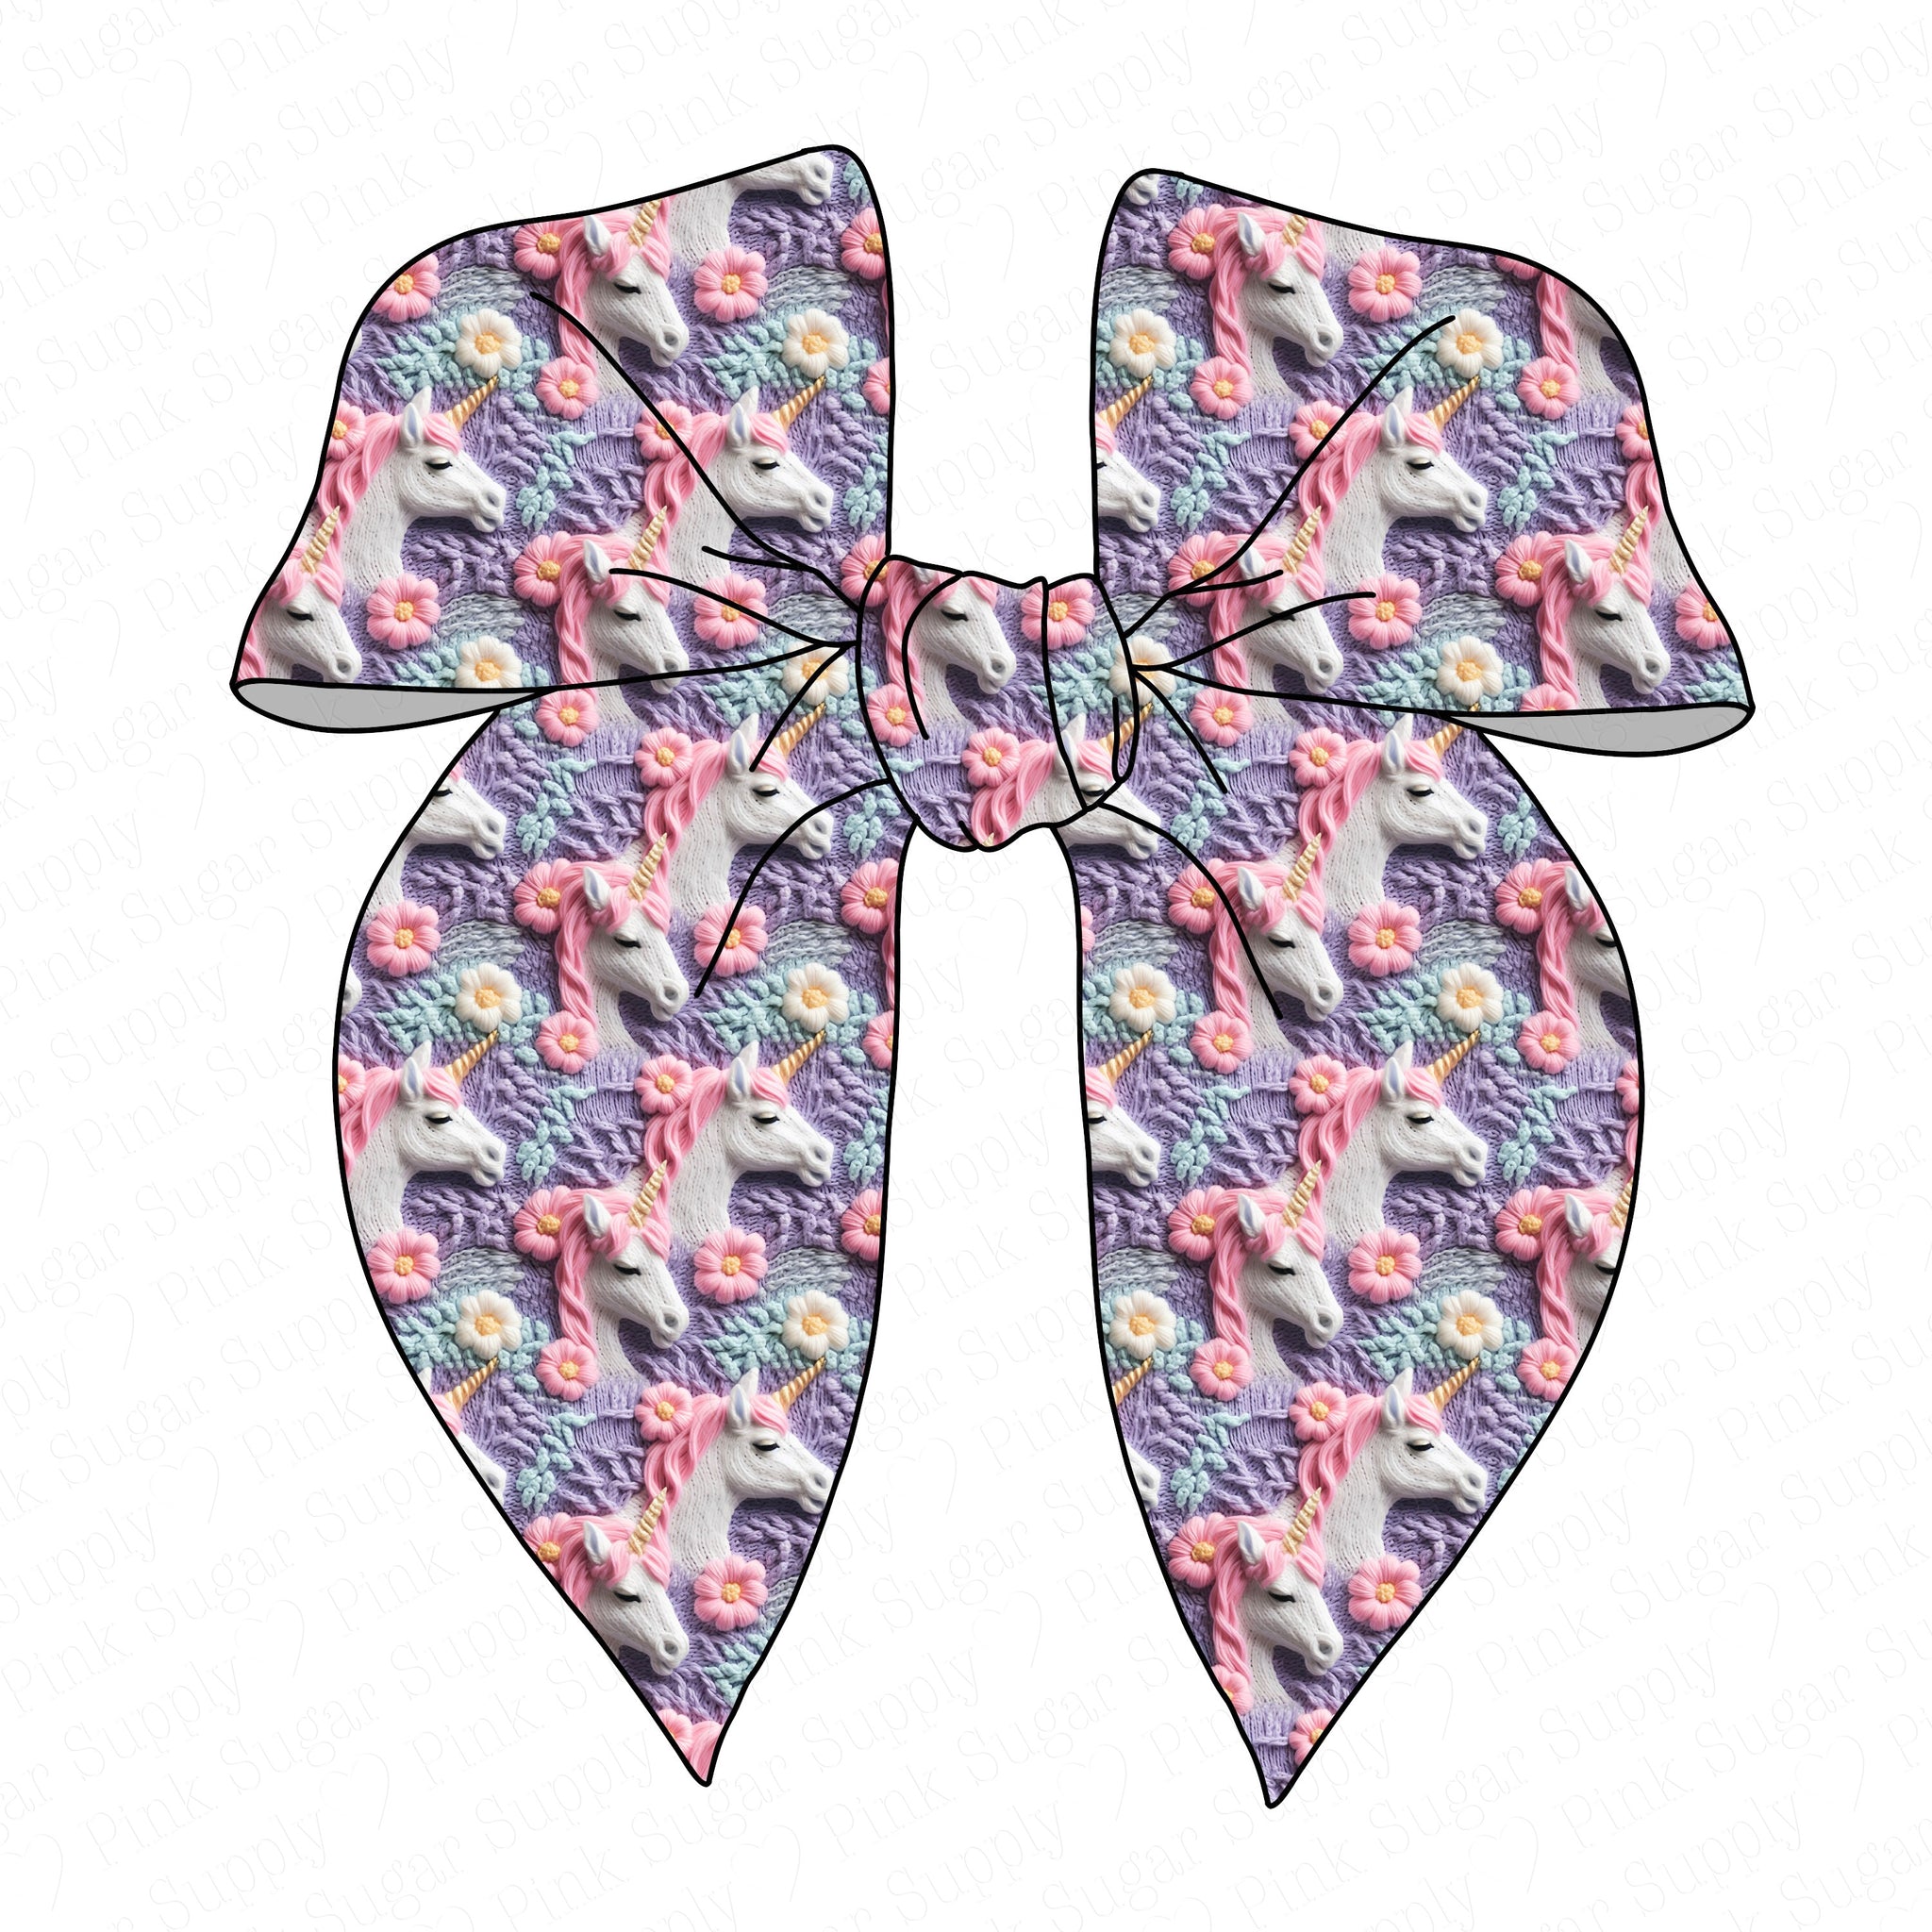 PRE-TIED SURGED EDGE BOW-"Embroidered Knit" Unicorn Floral